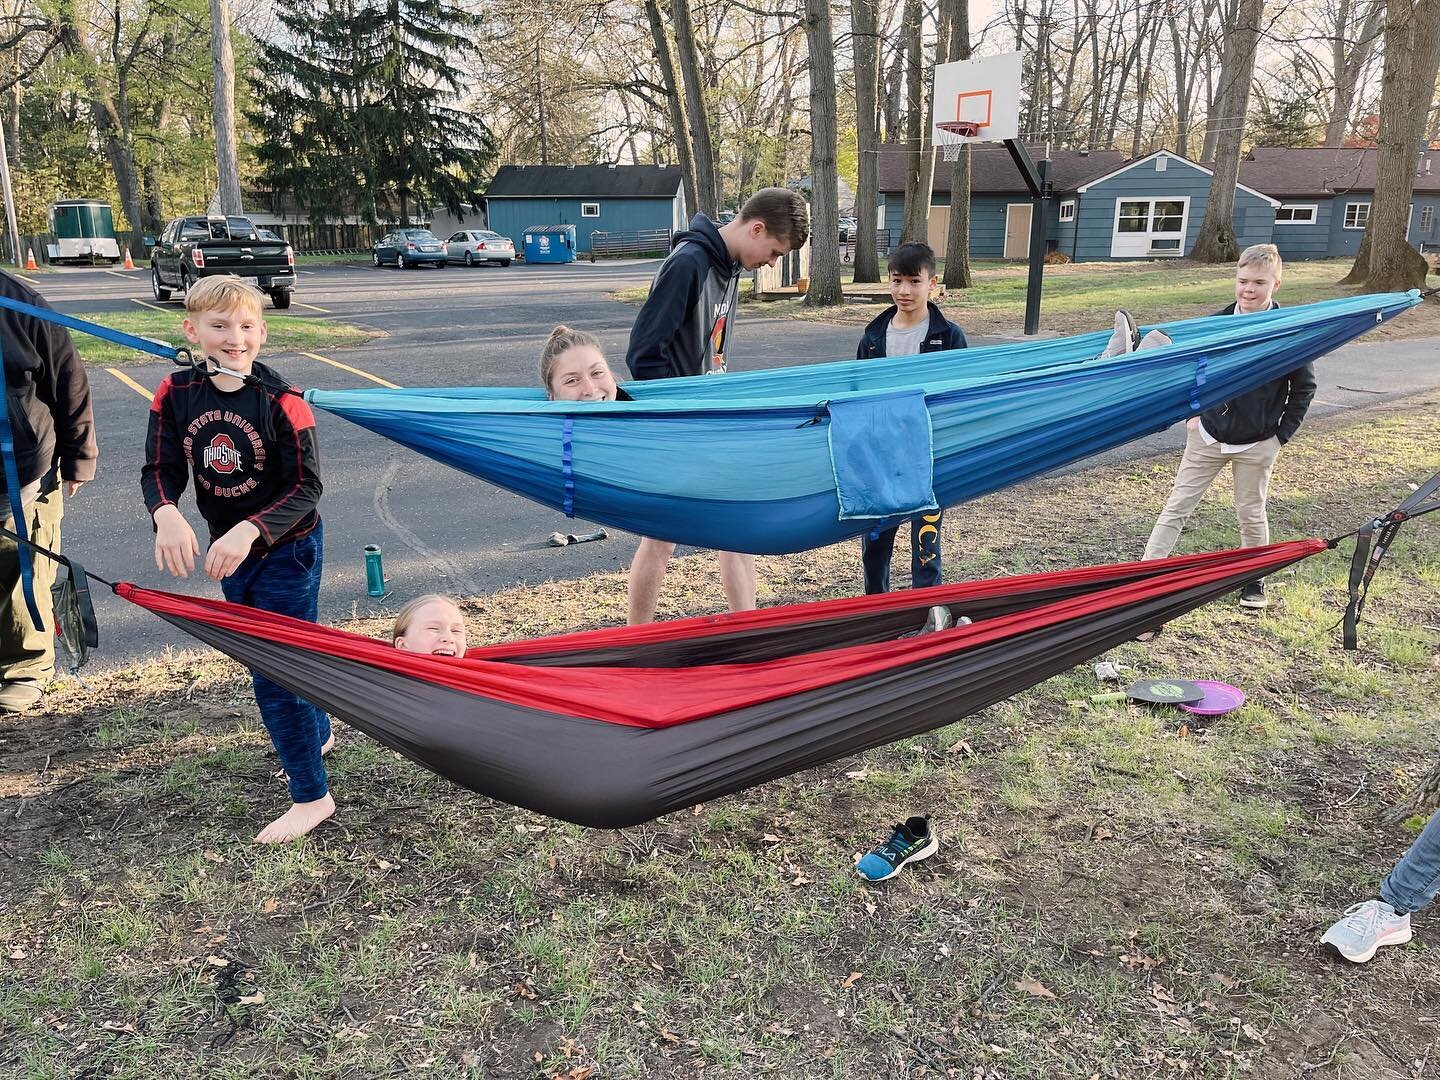 The students did an awesome job helping to clean up the backyard last week! They got to enjoy the fruits of their labor by hammocking last night. 

#toledo #ohio #youwilldobetterintoledo #franklinpark #church #faith #religion #hlac #harvestlane #harv